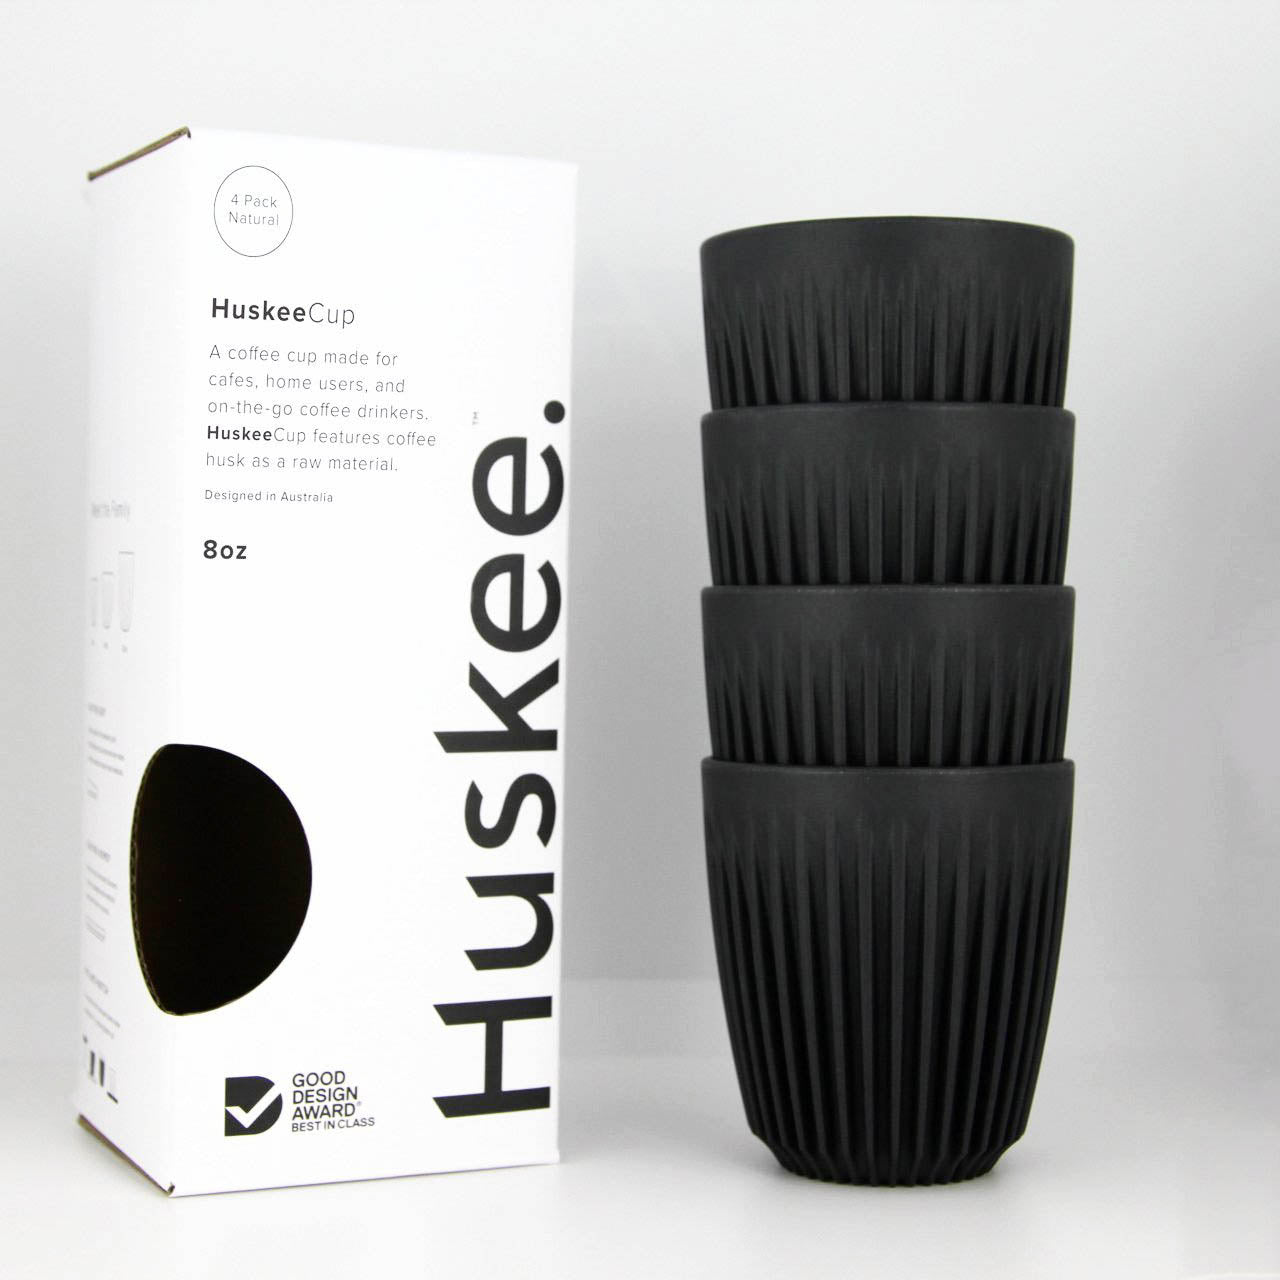 Huskee Coffee Cups Pack of 4 [8oz/240ml] (Charcoal/Natural)